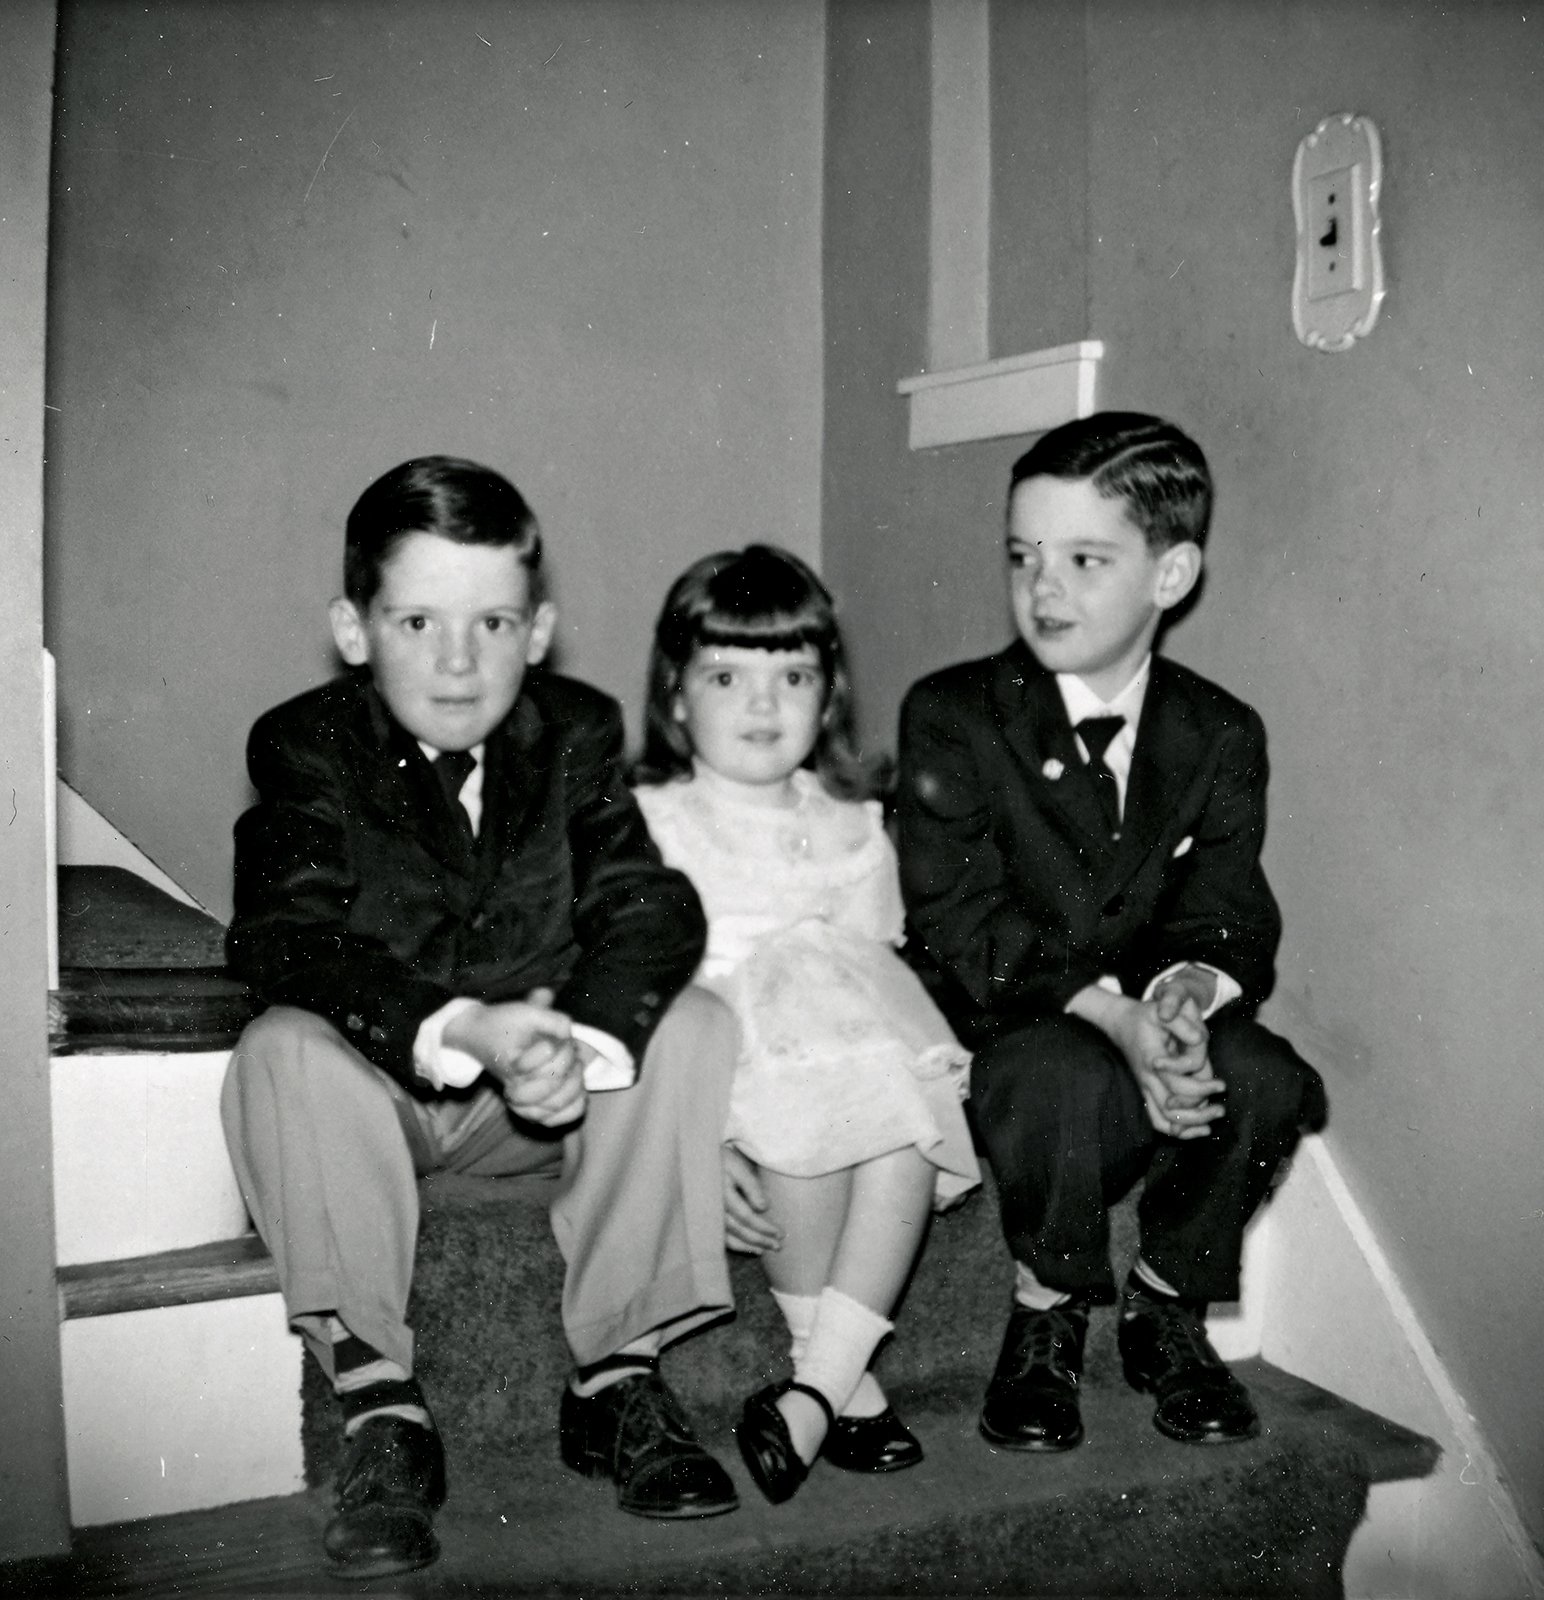 Alice and her two brothers, Kevin and Bill, Elmont, Long Island, New York, 1956.